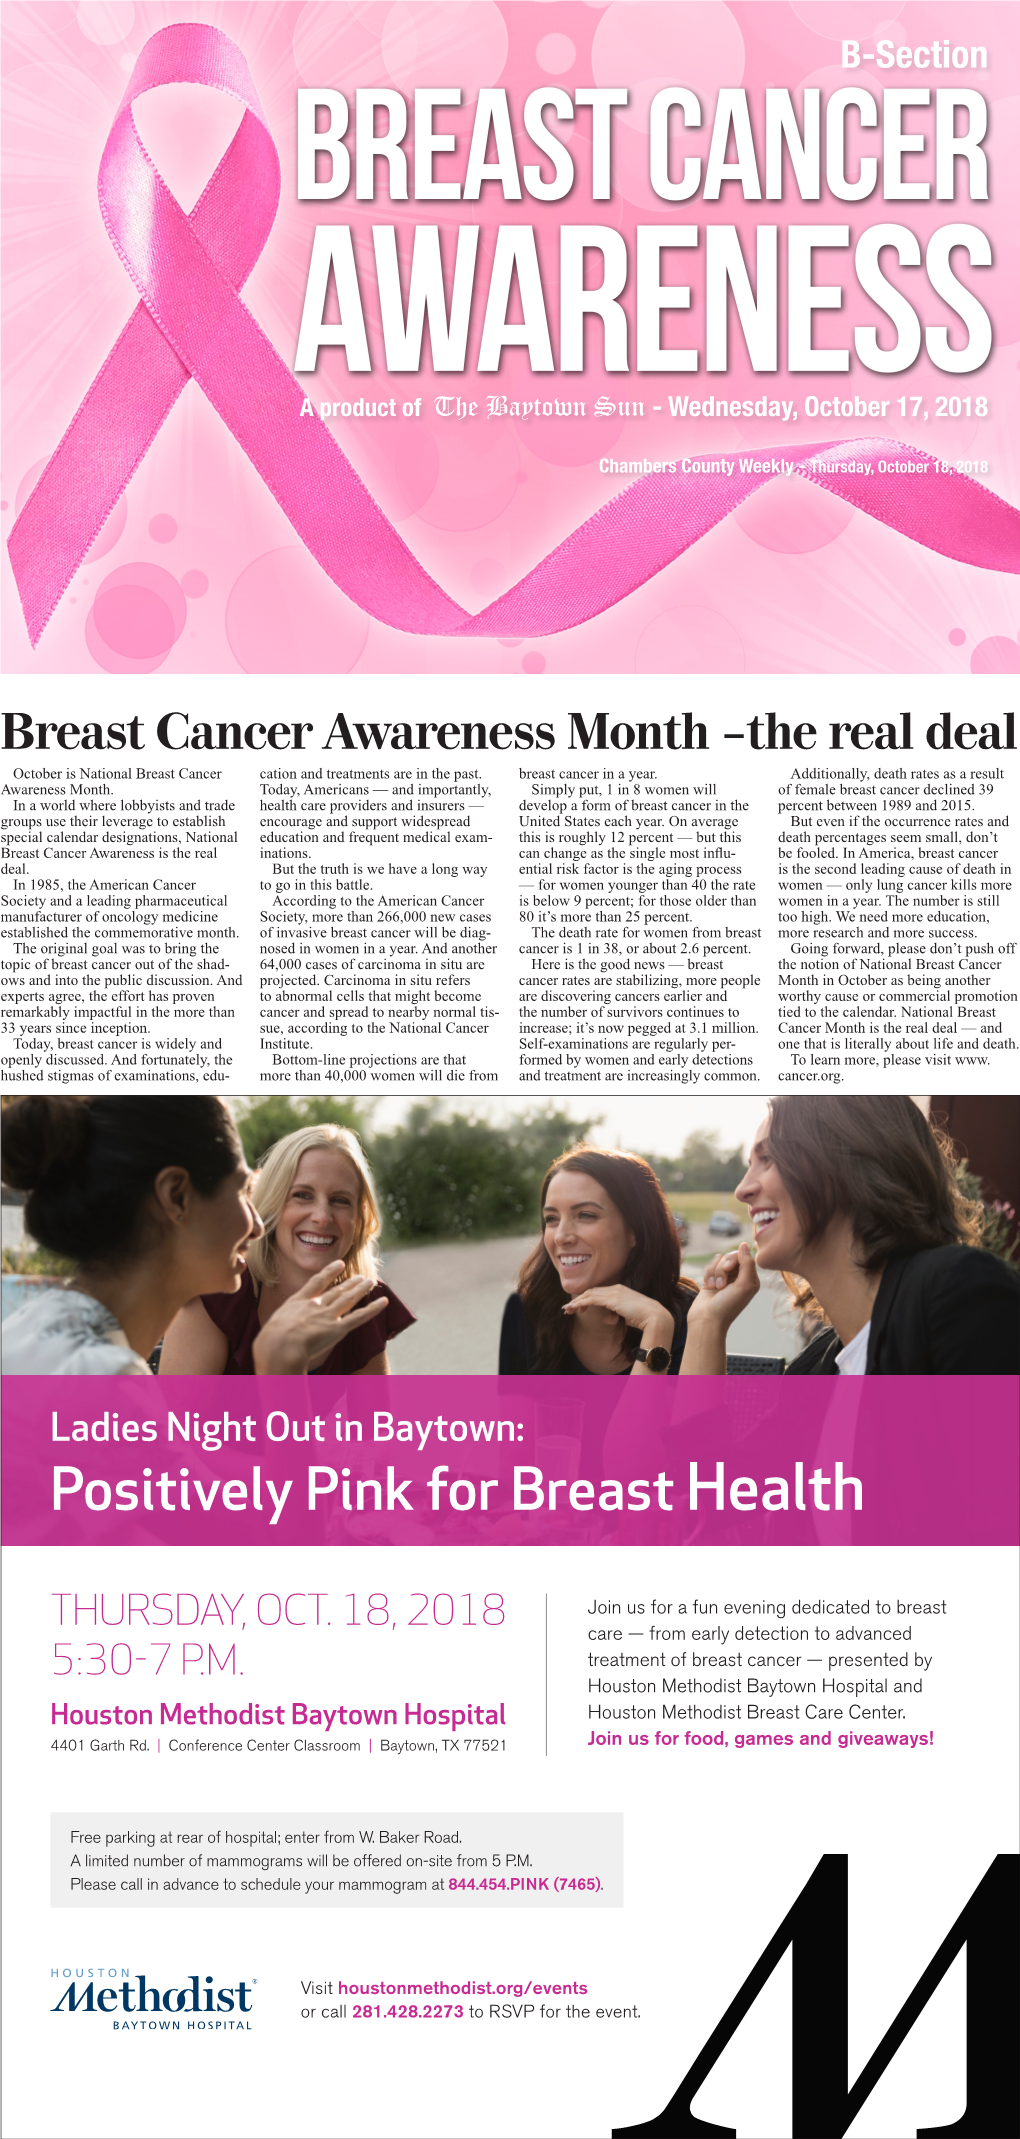 Positively Pink for Breast Health